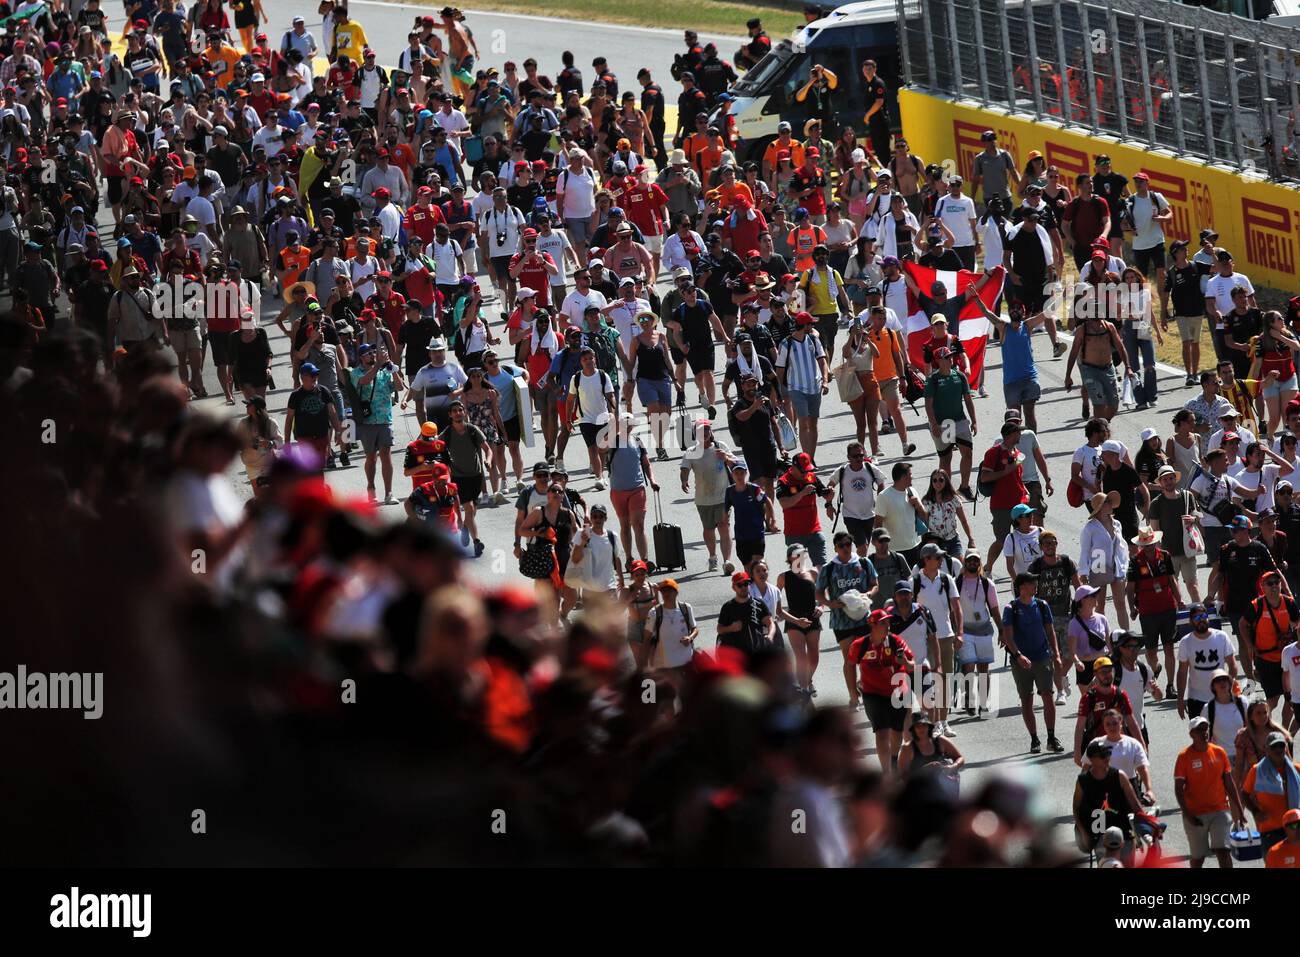 Circuit atmosphere - fans invade the circuit to head to the podium at the end of the race. Spanish Grand Prix, Sunday 22nd May 2022. Barcelona, Spain. Stock Photo